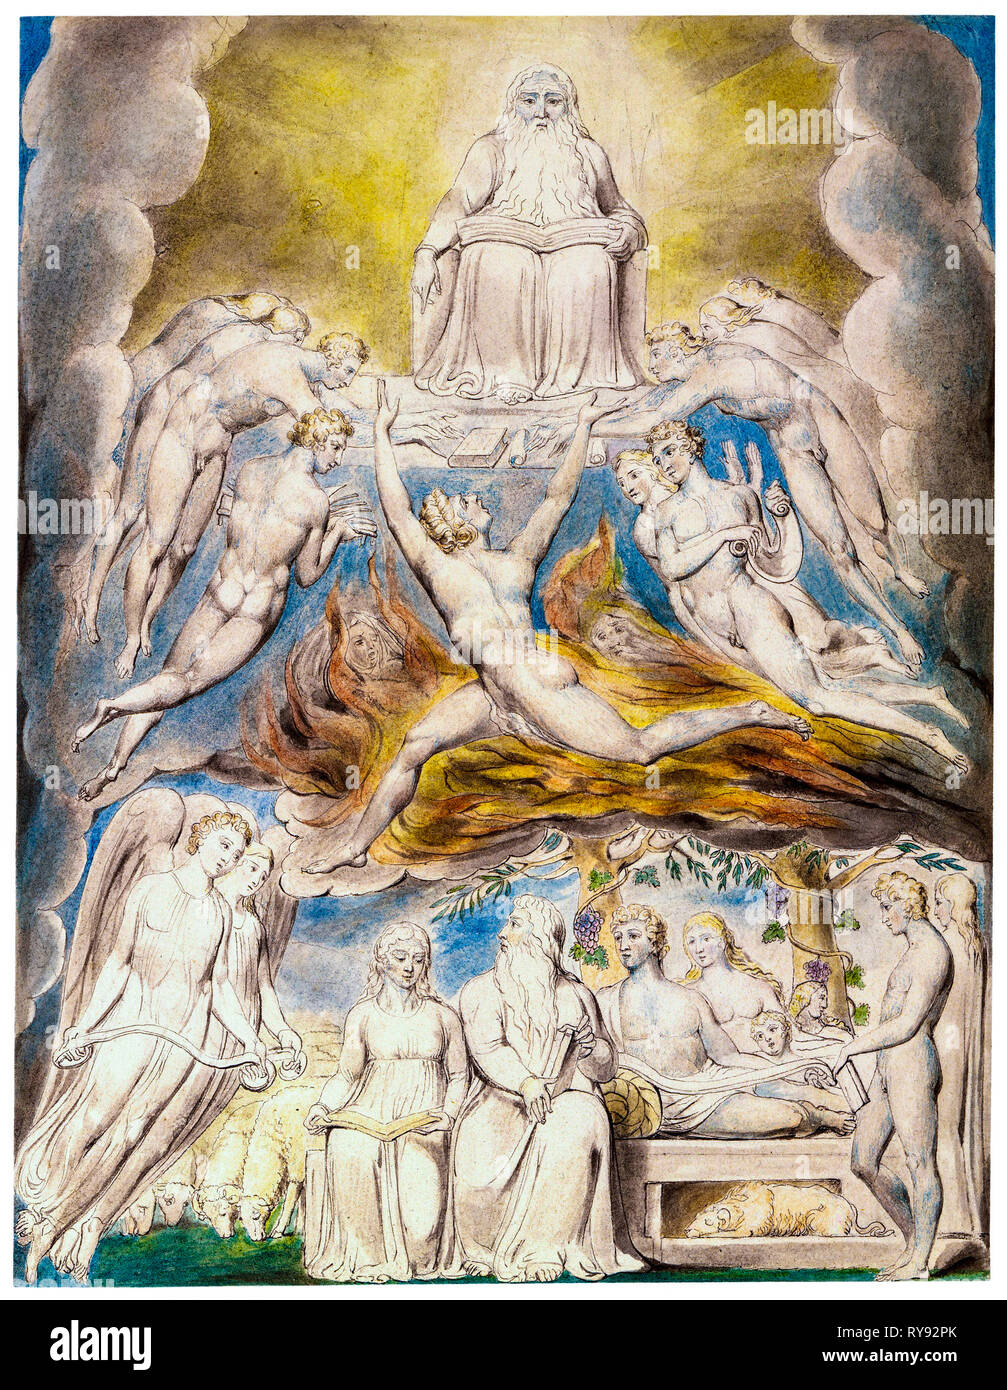 Satan Before the Throne of God, watercolour painting over pen and ink by William Blake, 1805 Stock Photo